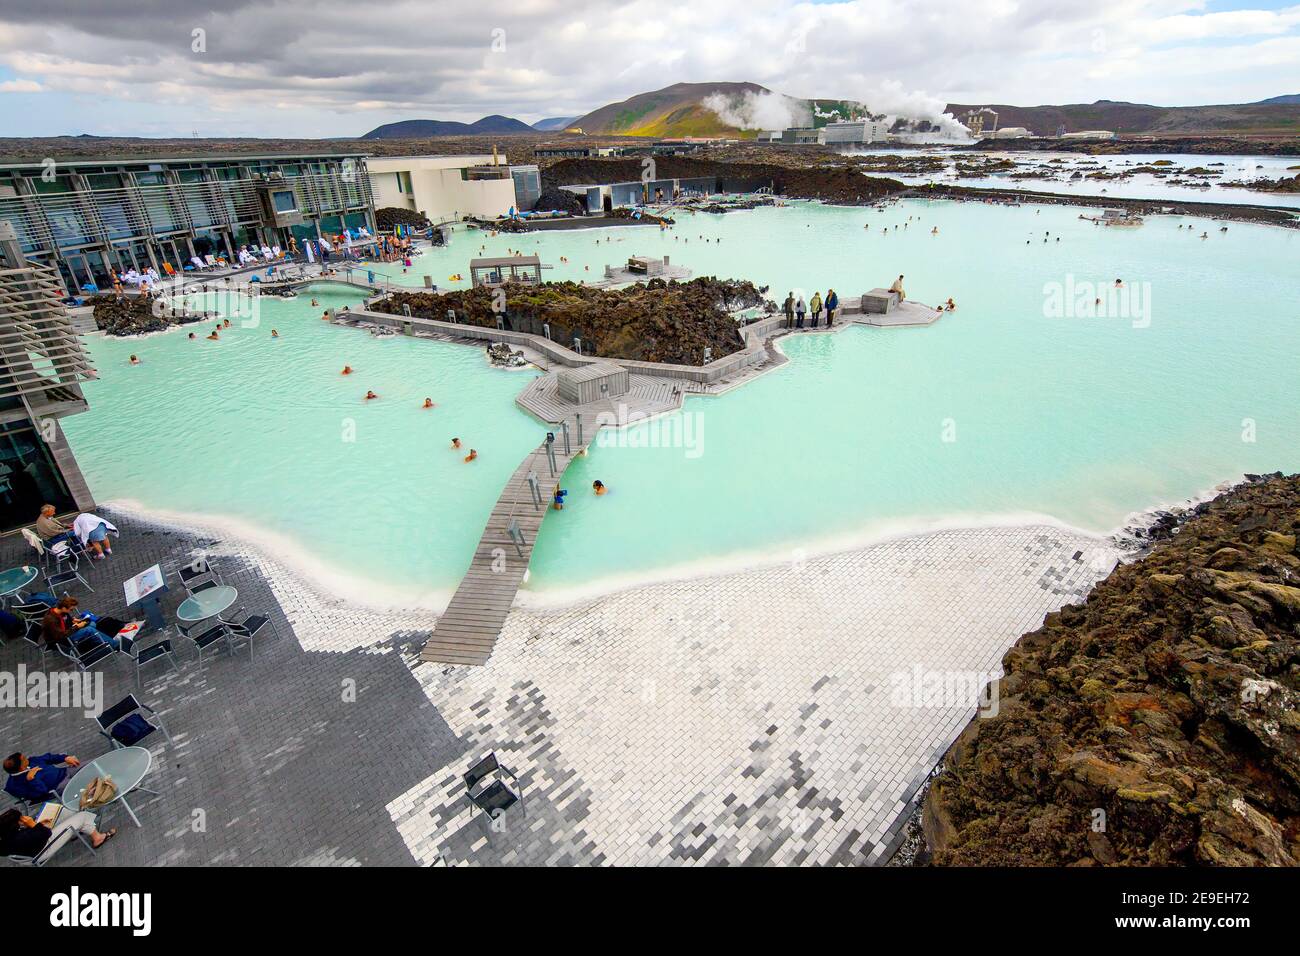 Elevated view of Blue Lagoon (Icelandic: 'Bláa lónið') geothermal spa is one of the most visited attractions in Iceland. Stock Photo